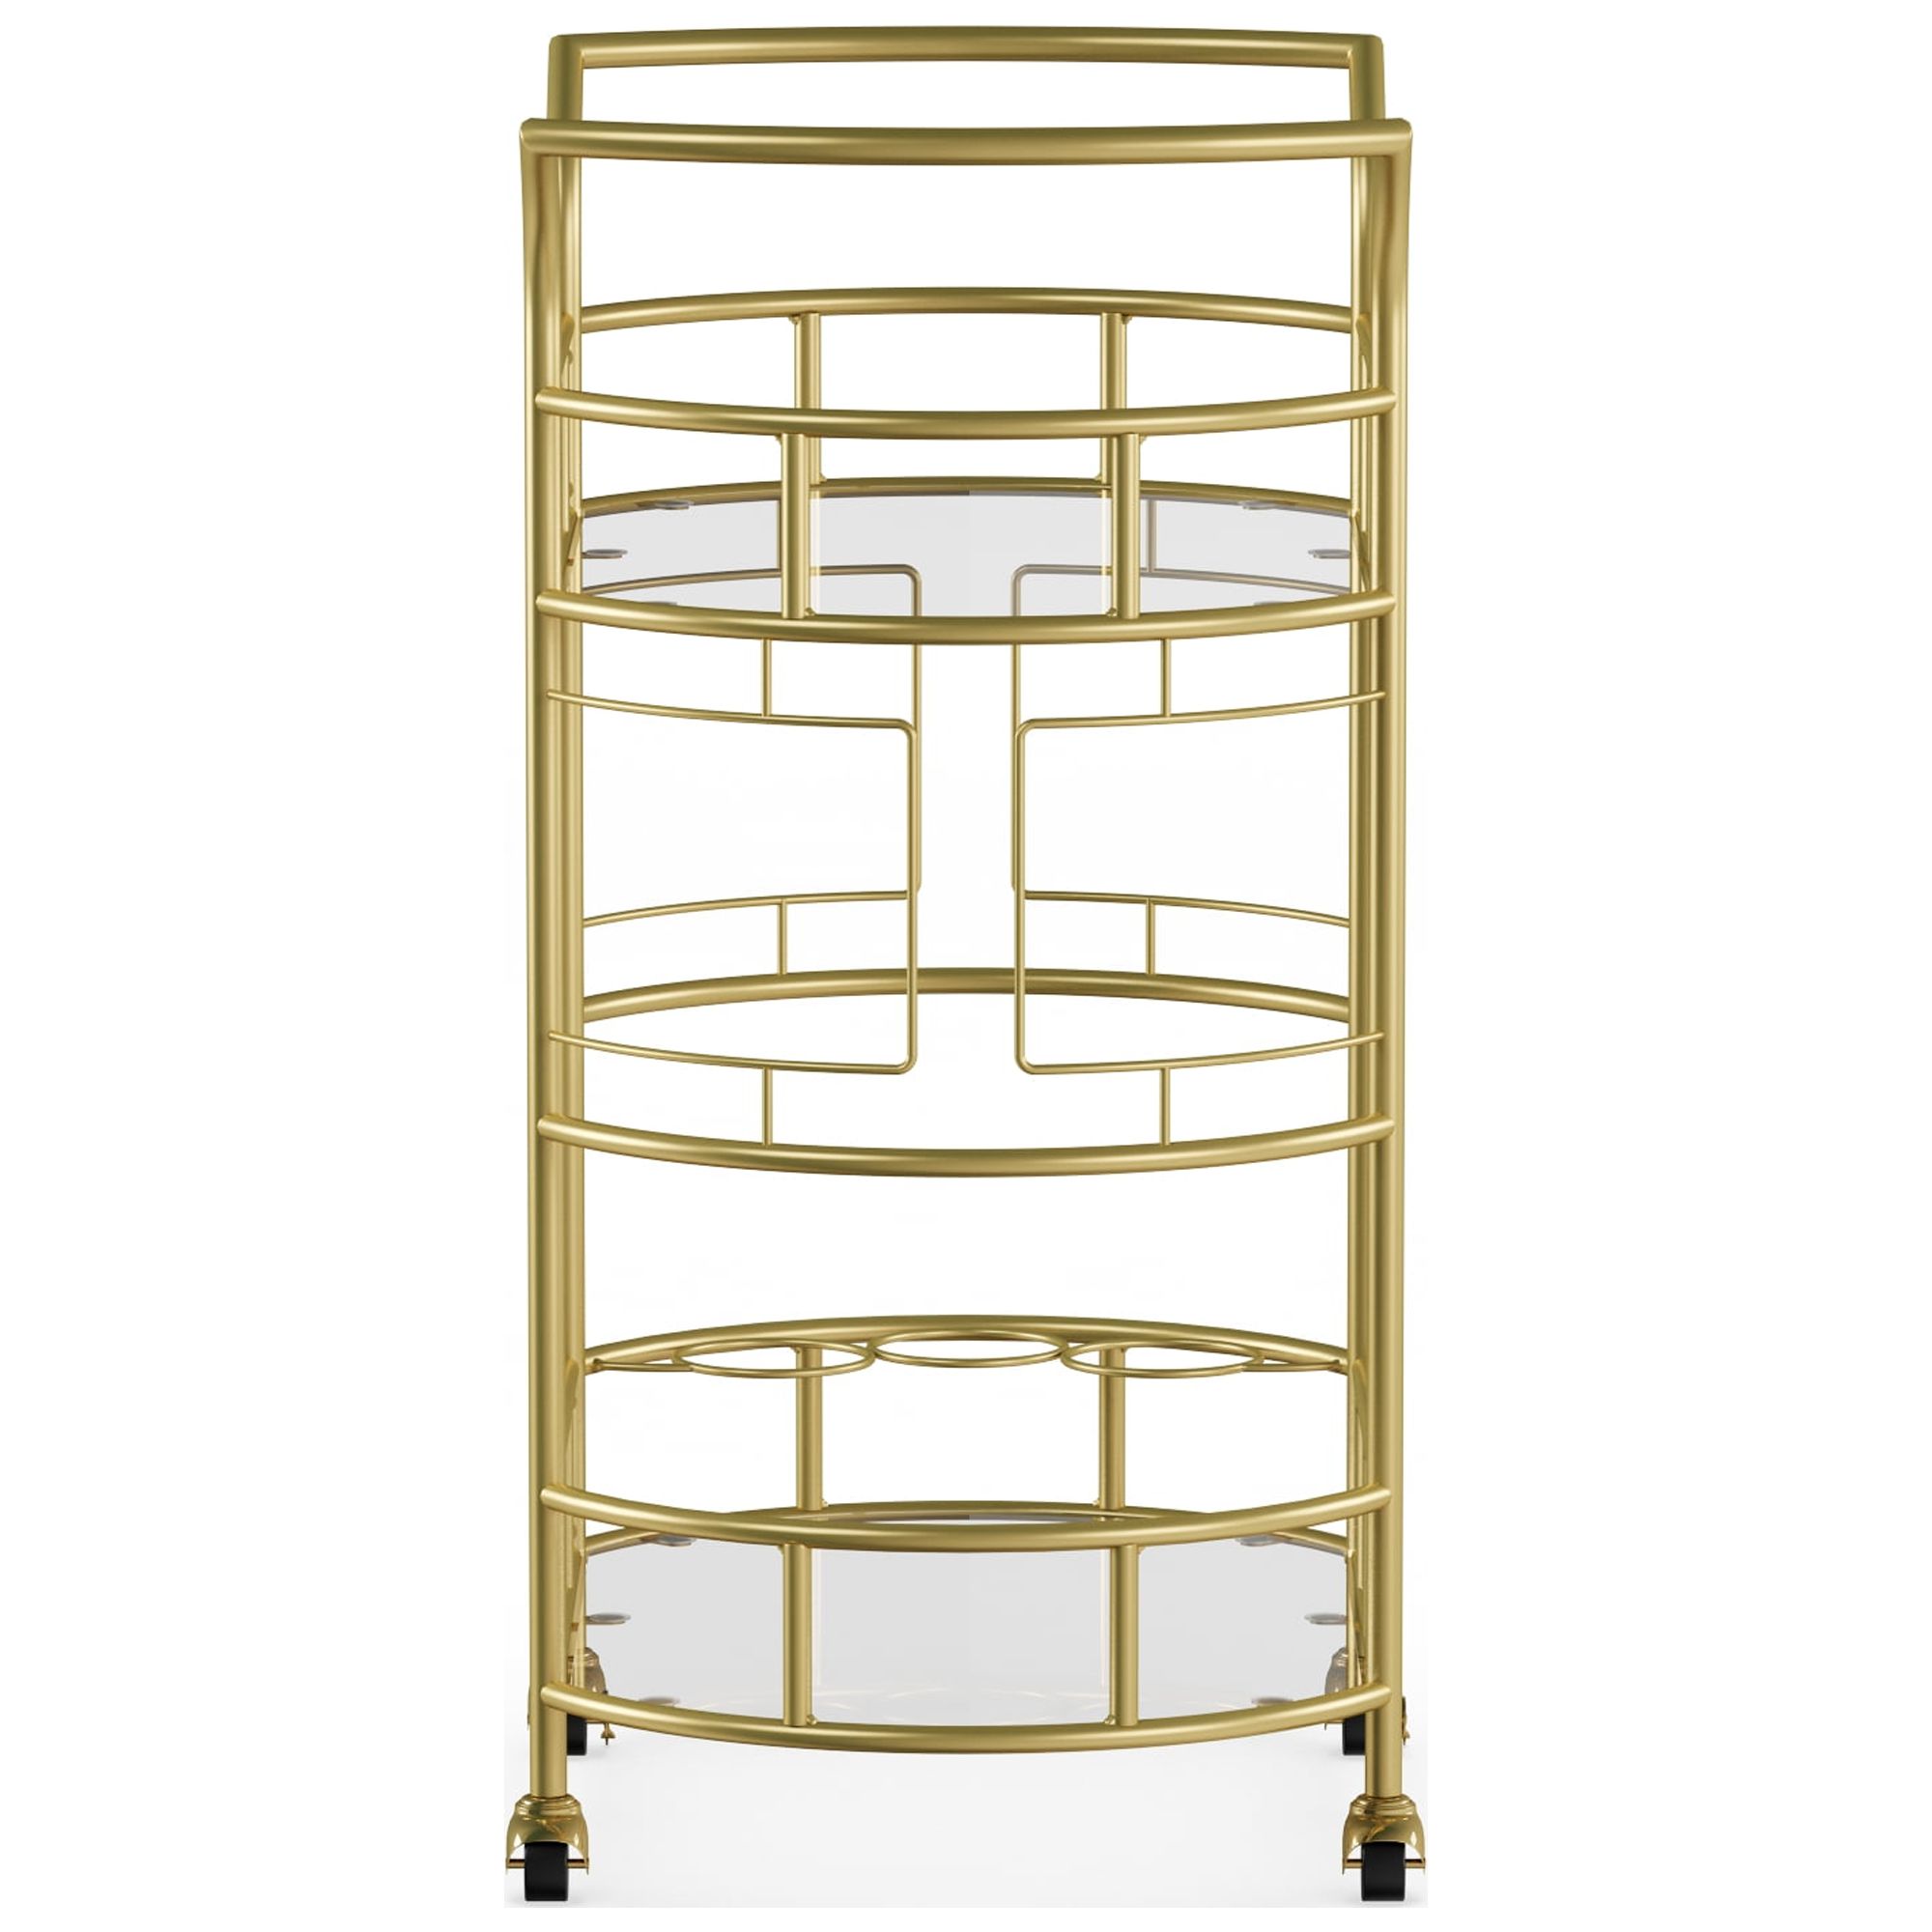 Better Homes & Gardens Fitzgerald Bar Cart with Matte Gold Metal Finish, 2-Tiers - image 5 of 10